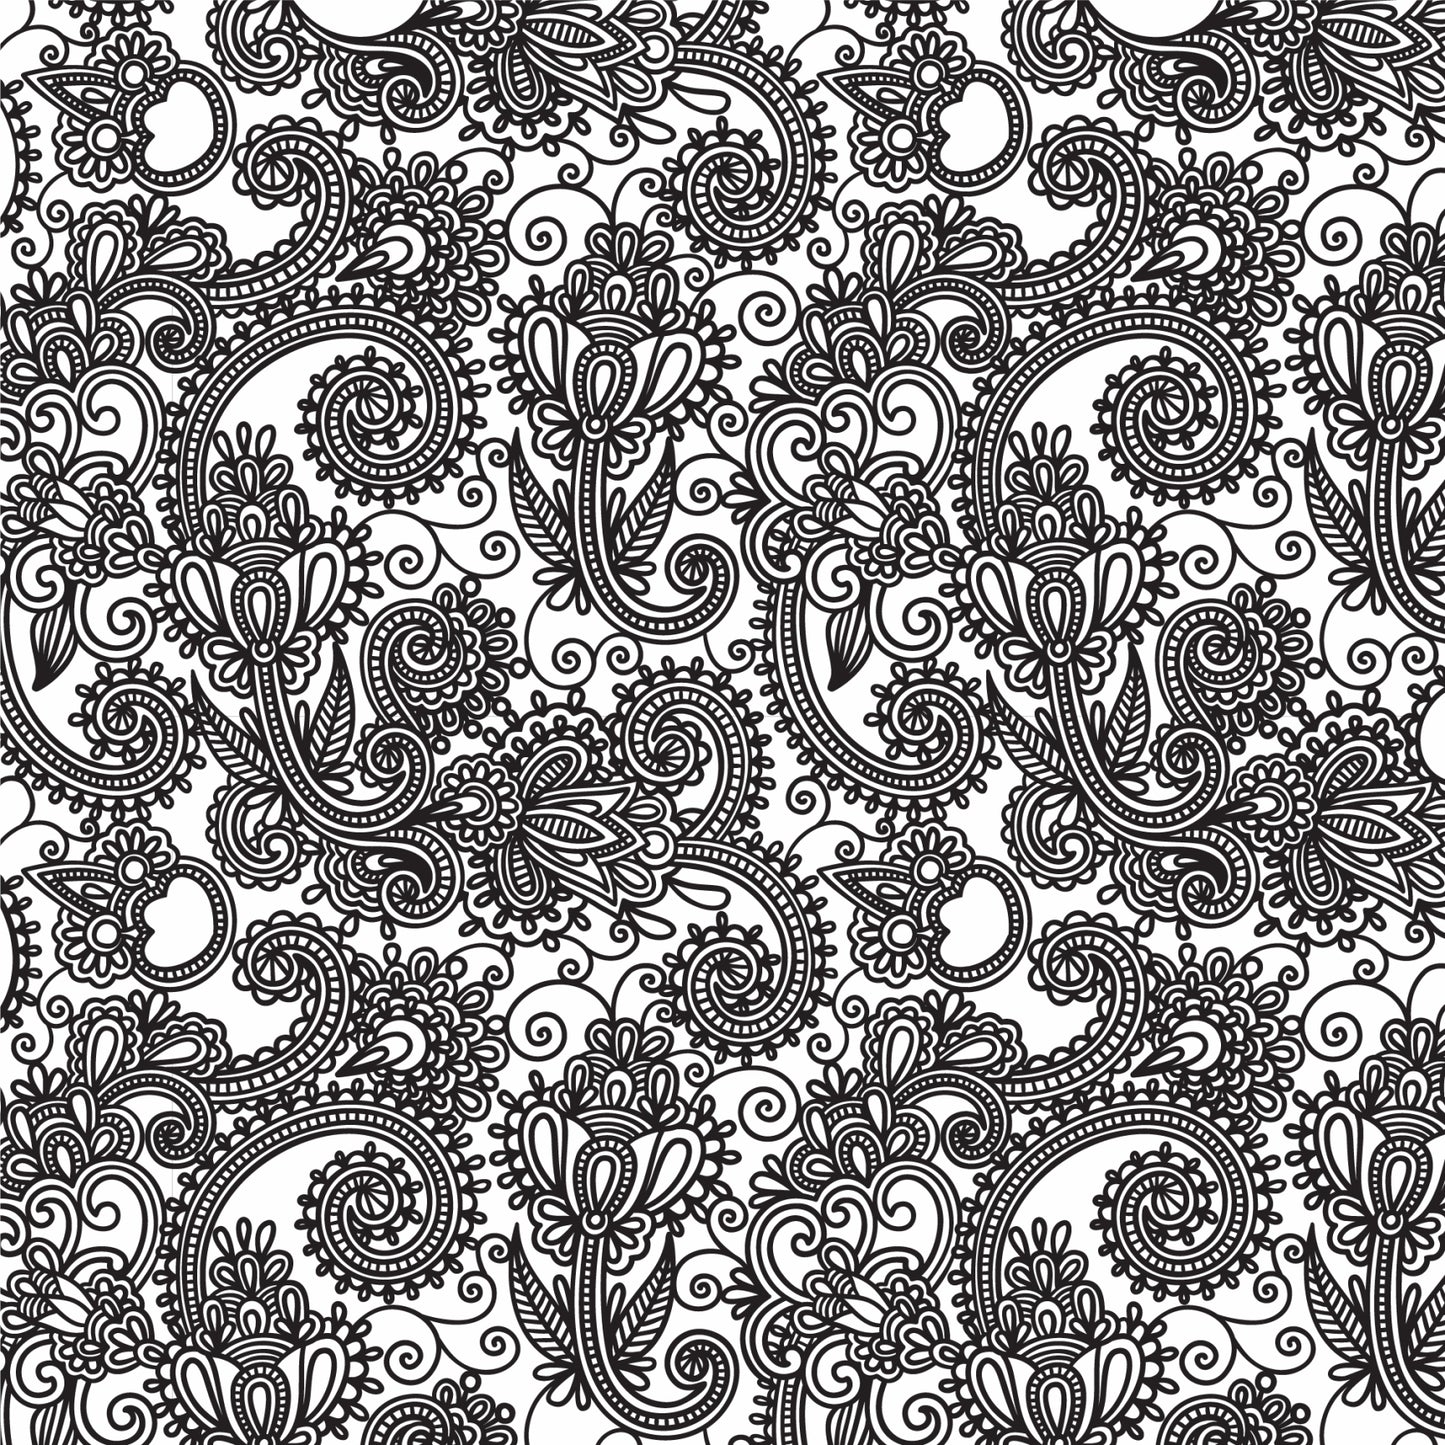 Lace Pattern #3 water slide decal